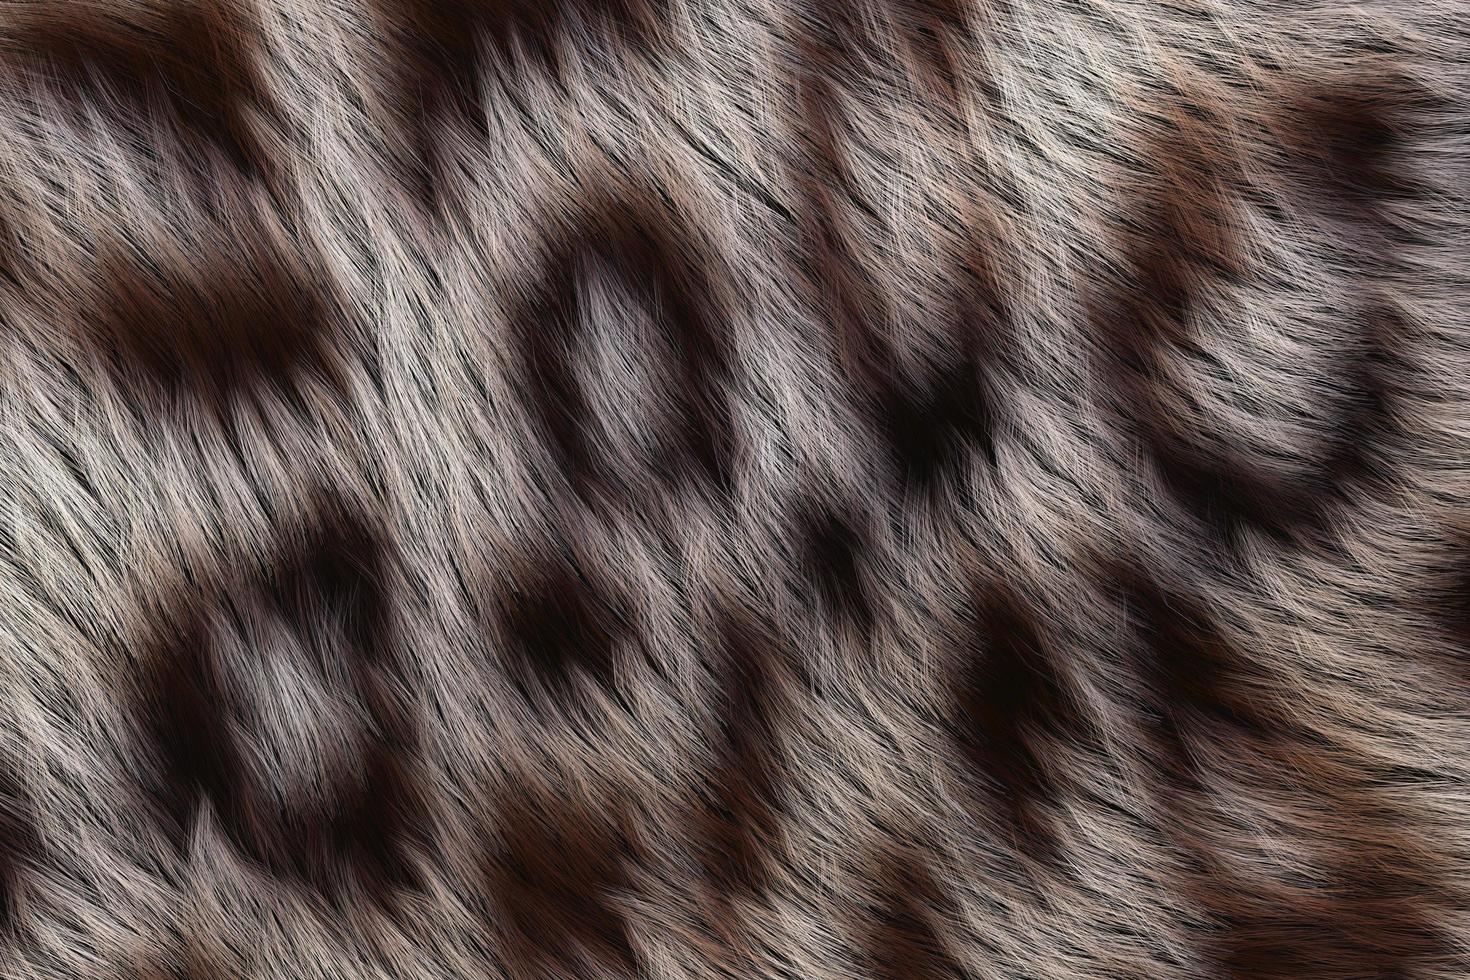 Red Tabby Fur Texture Picture, Free Photograph